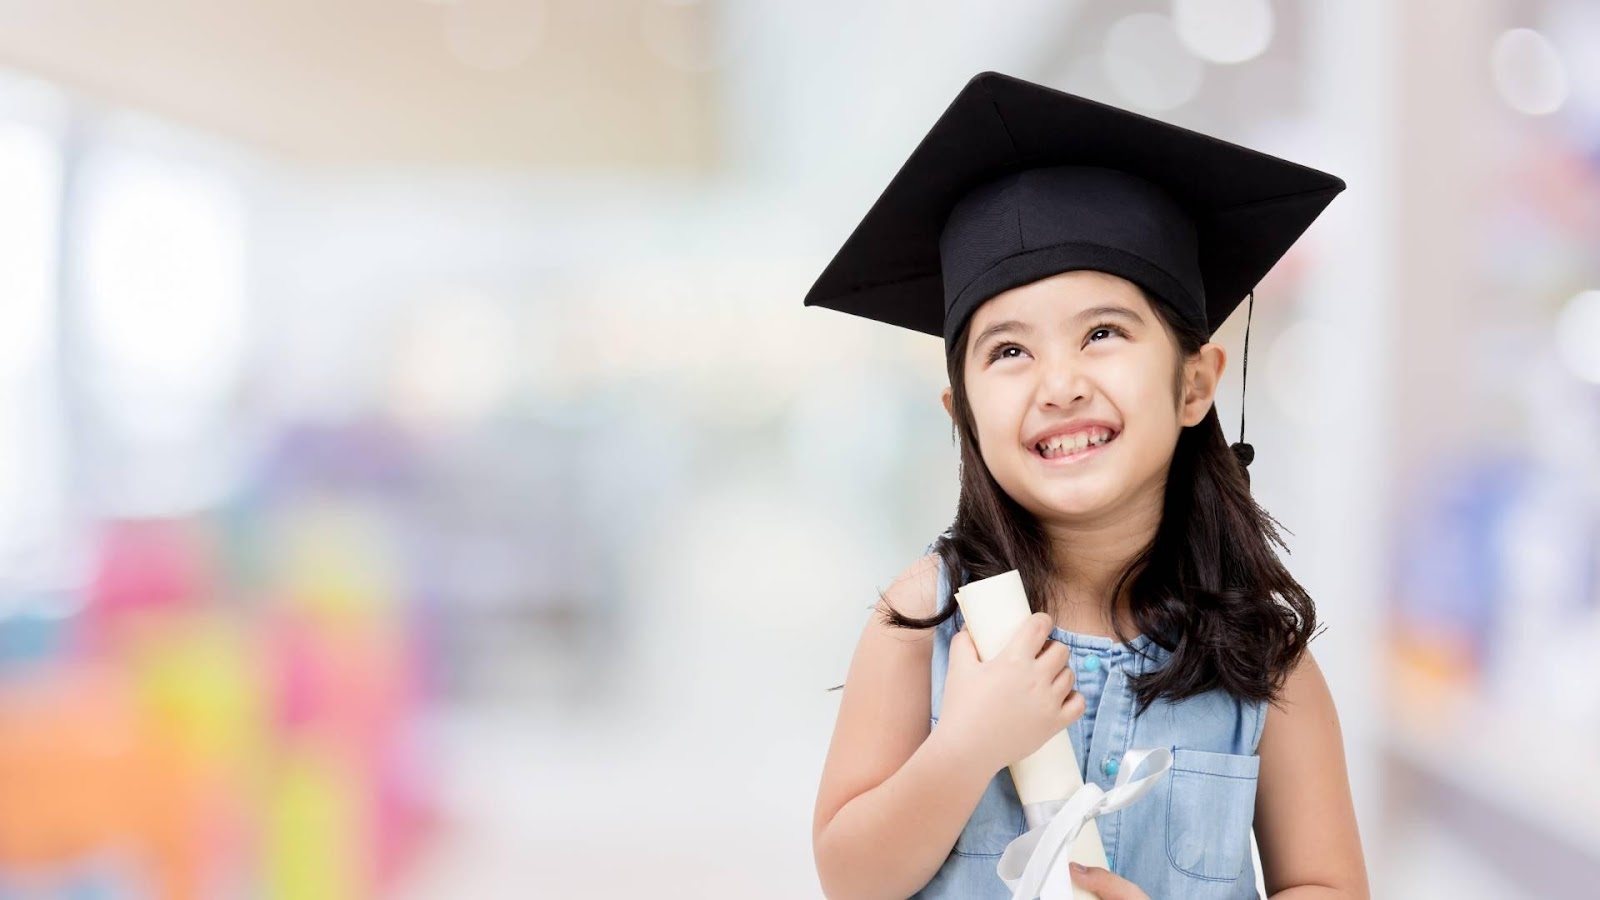 A young child wearing a graduation cap and gown

Description automatically generated